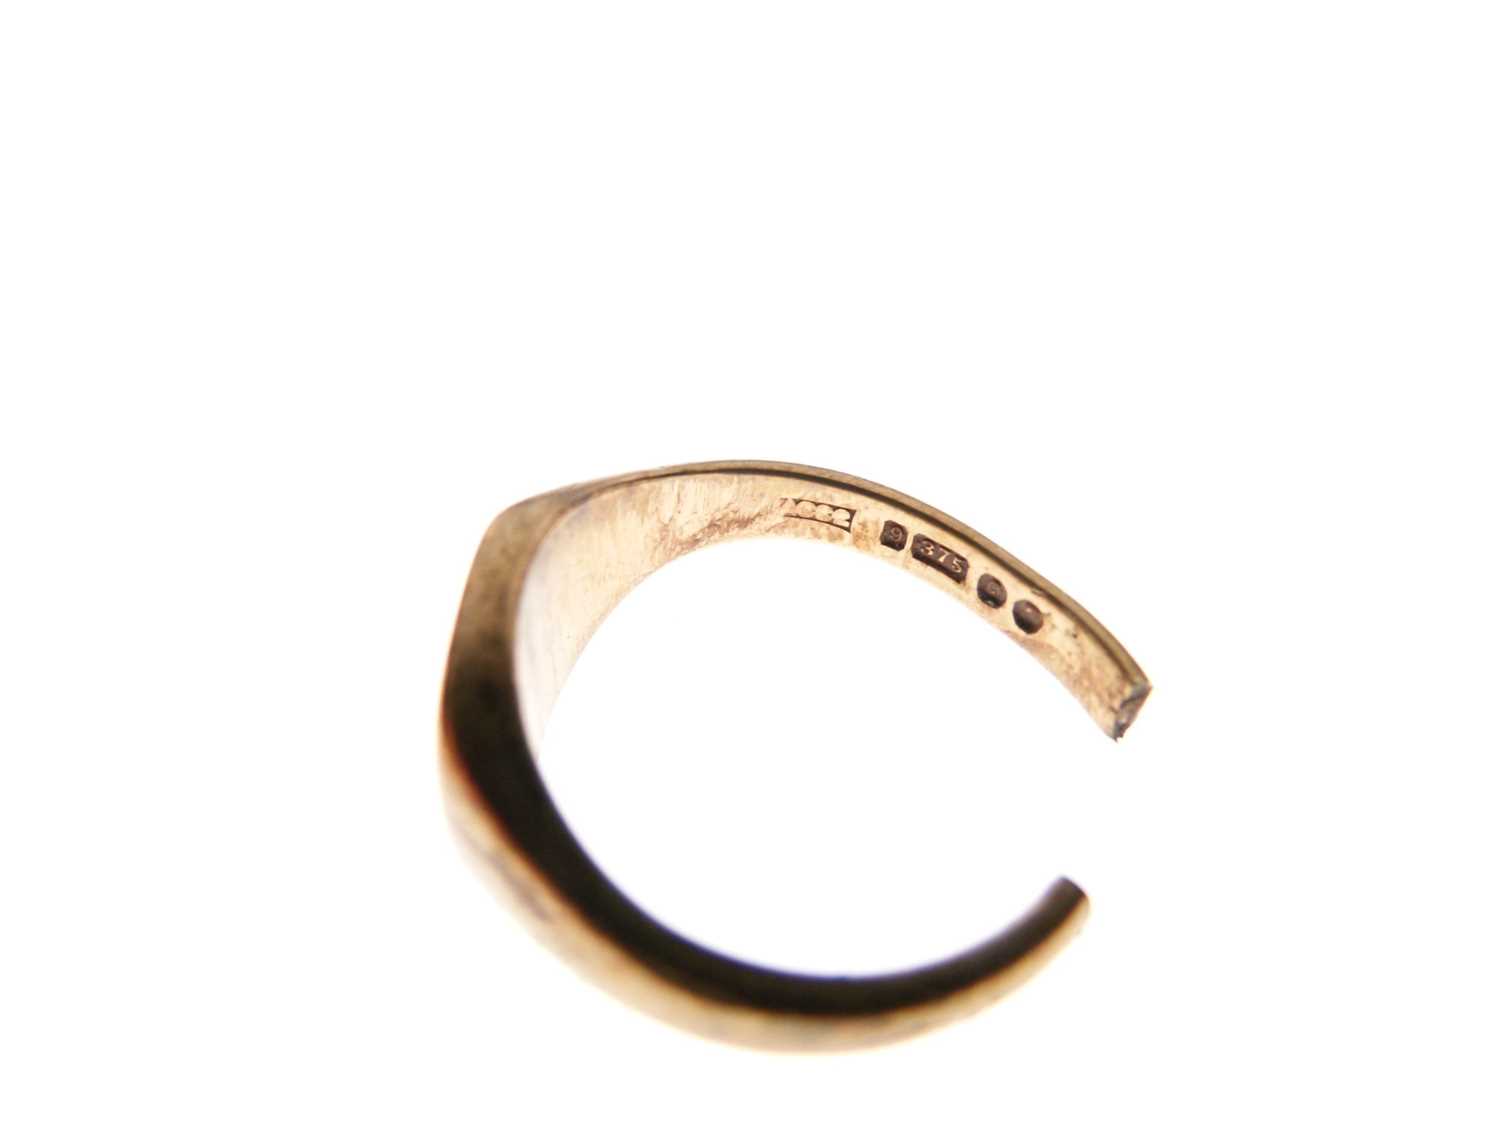 9ct signet ring (cut), 7.1g approx - Image 4 of 5